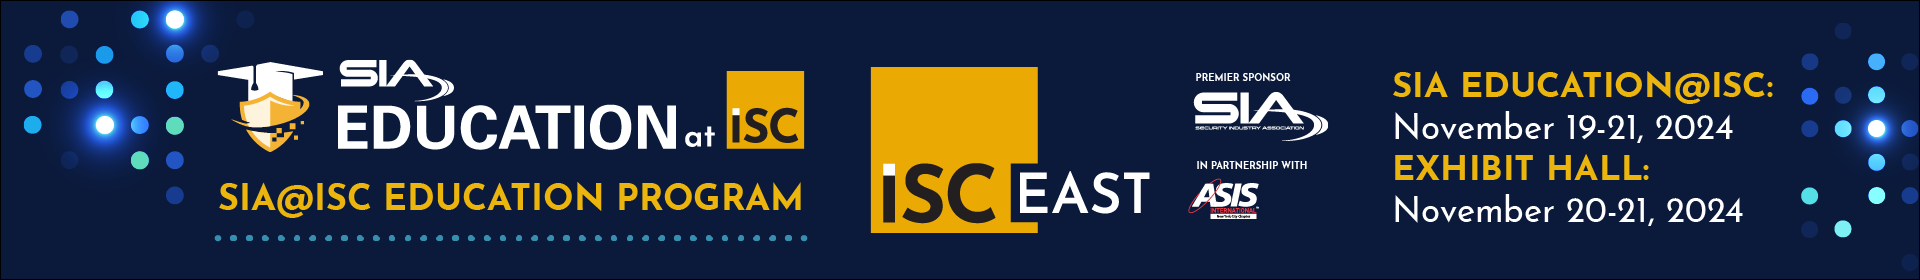 ISC East 2024 Event Banner